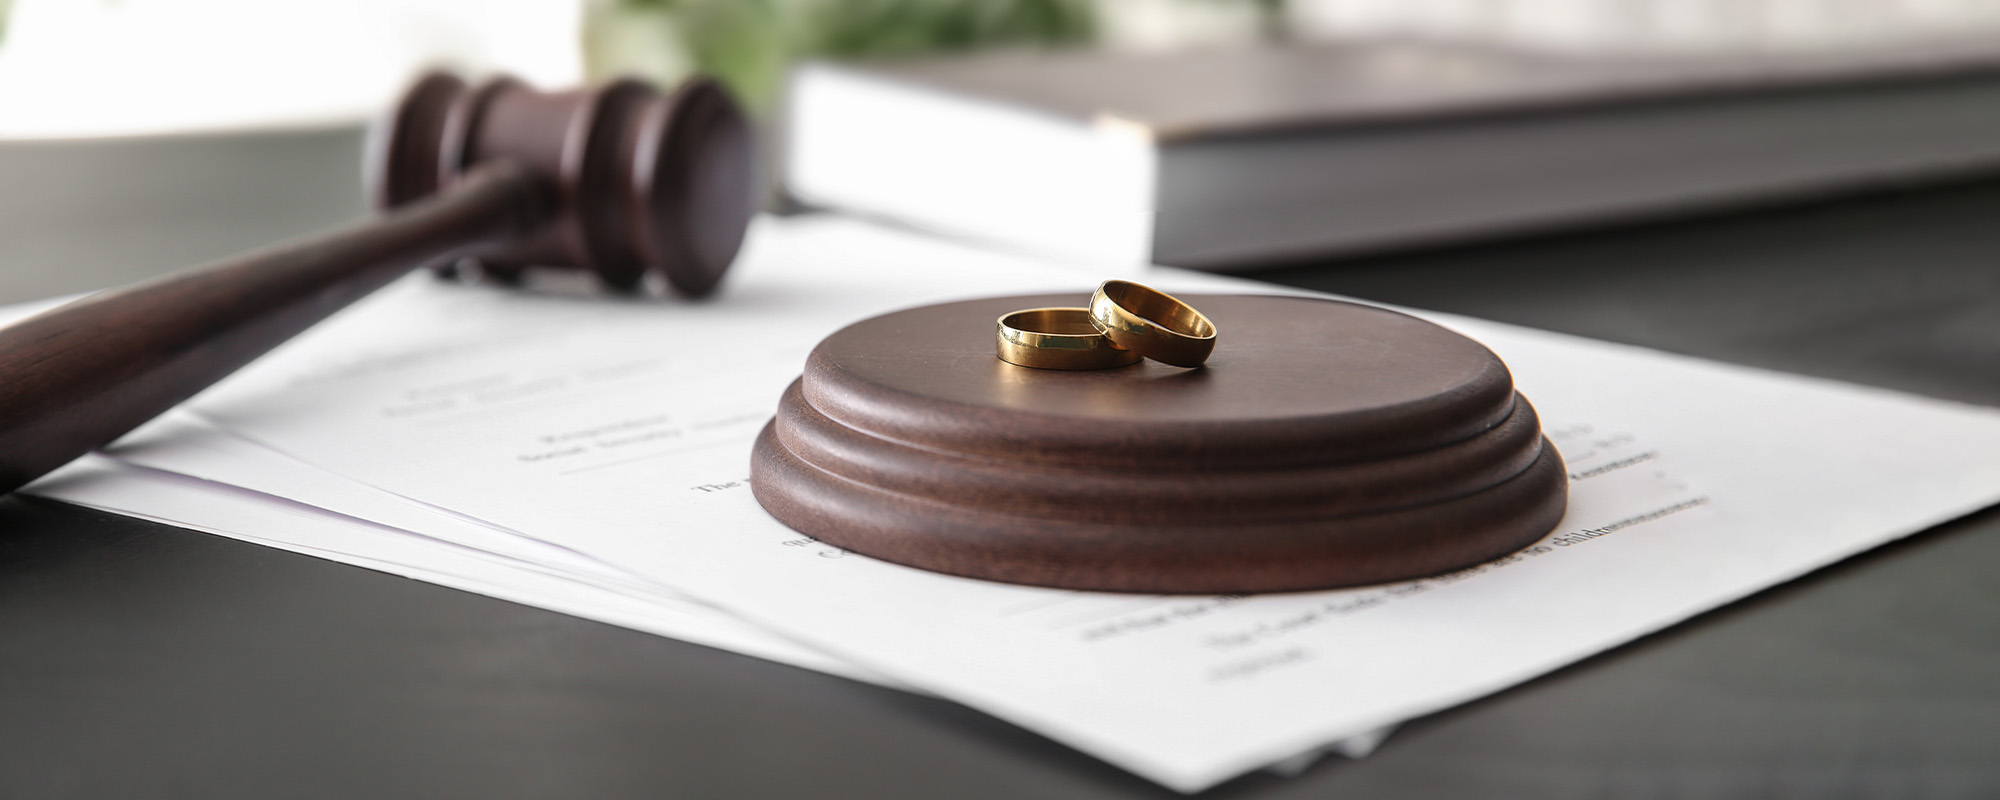 rings with decree of divorce and judge gavel on table